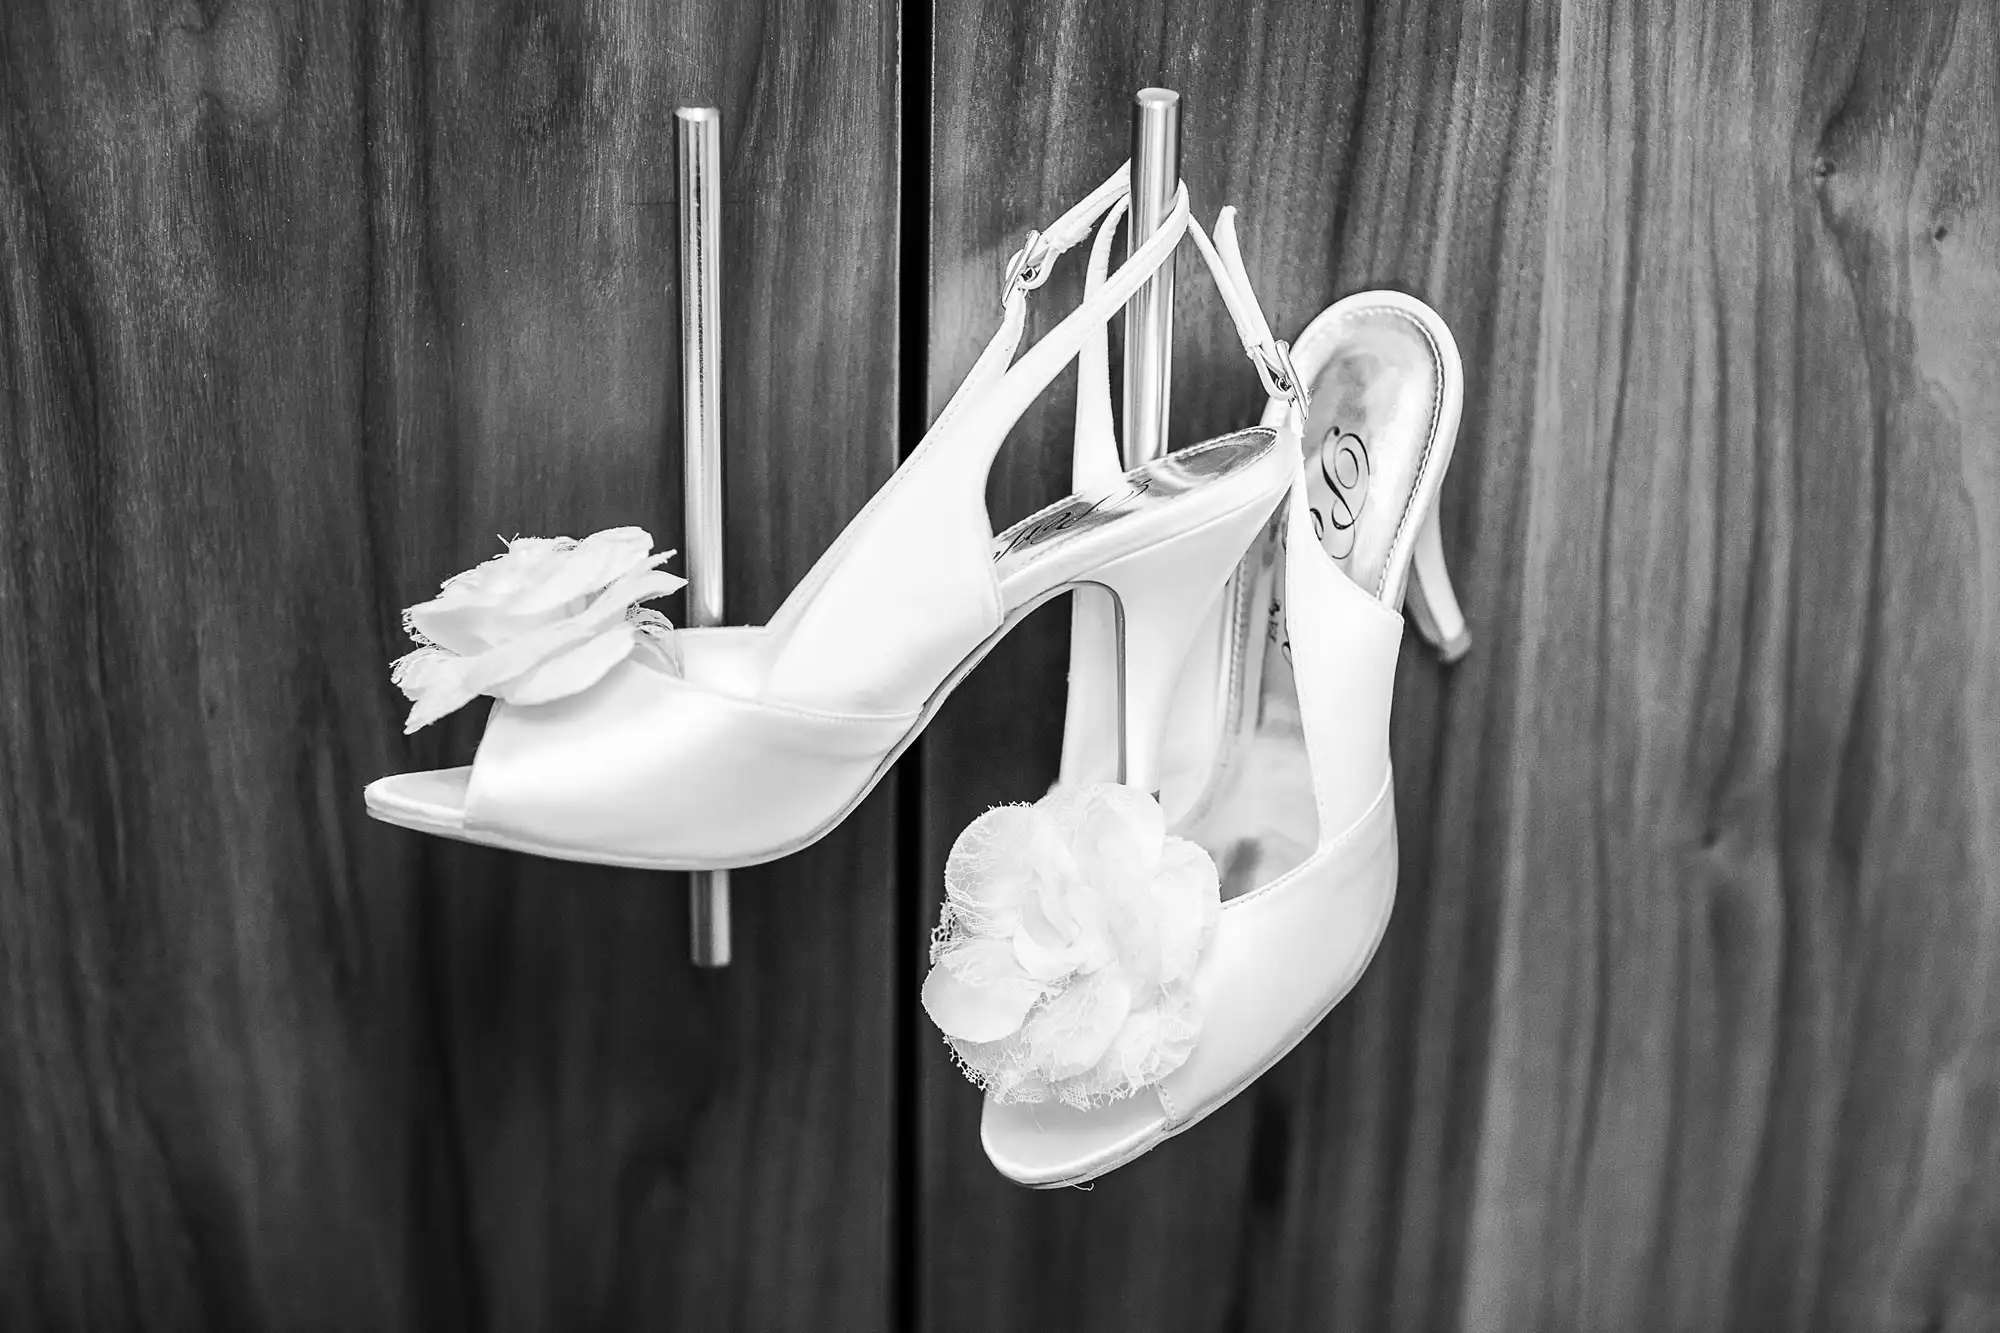 A pair of white bridal high heel shoes with floral decorations hanging on a wooden fence.